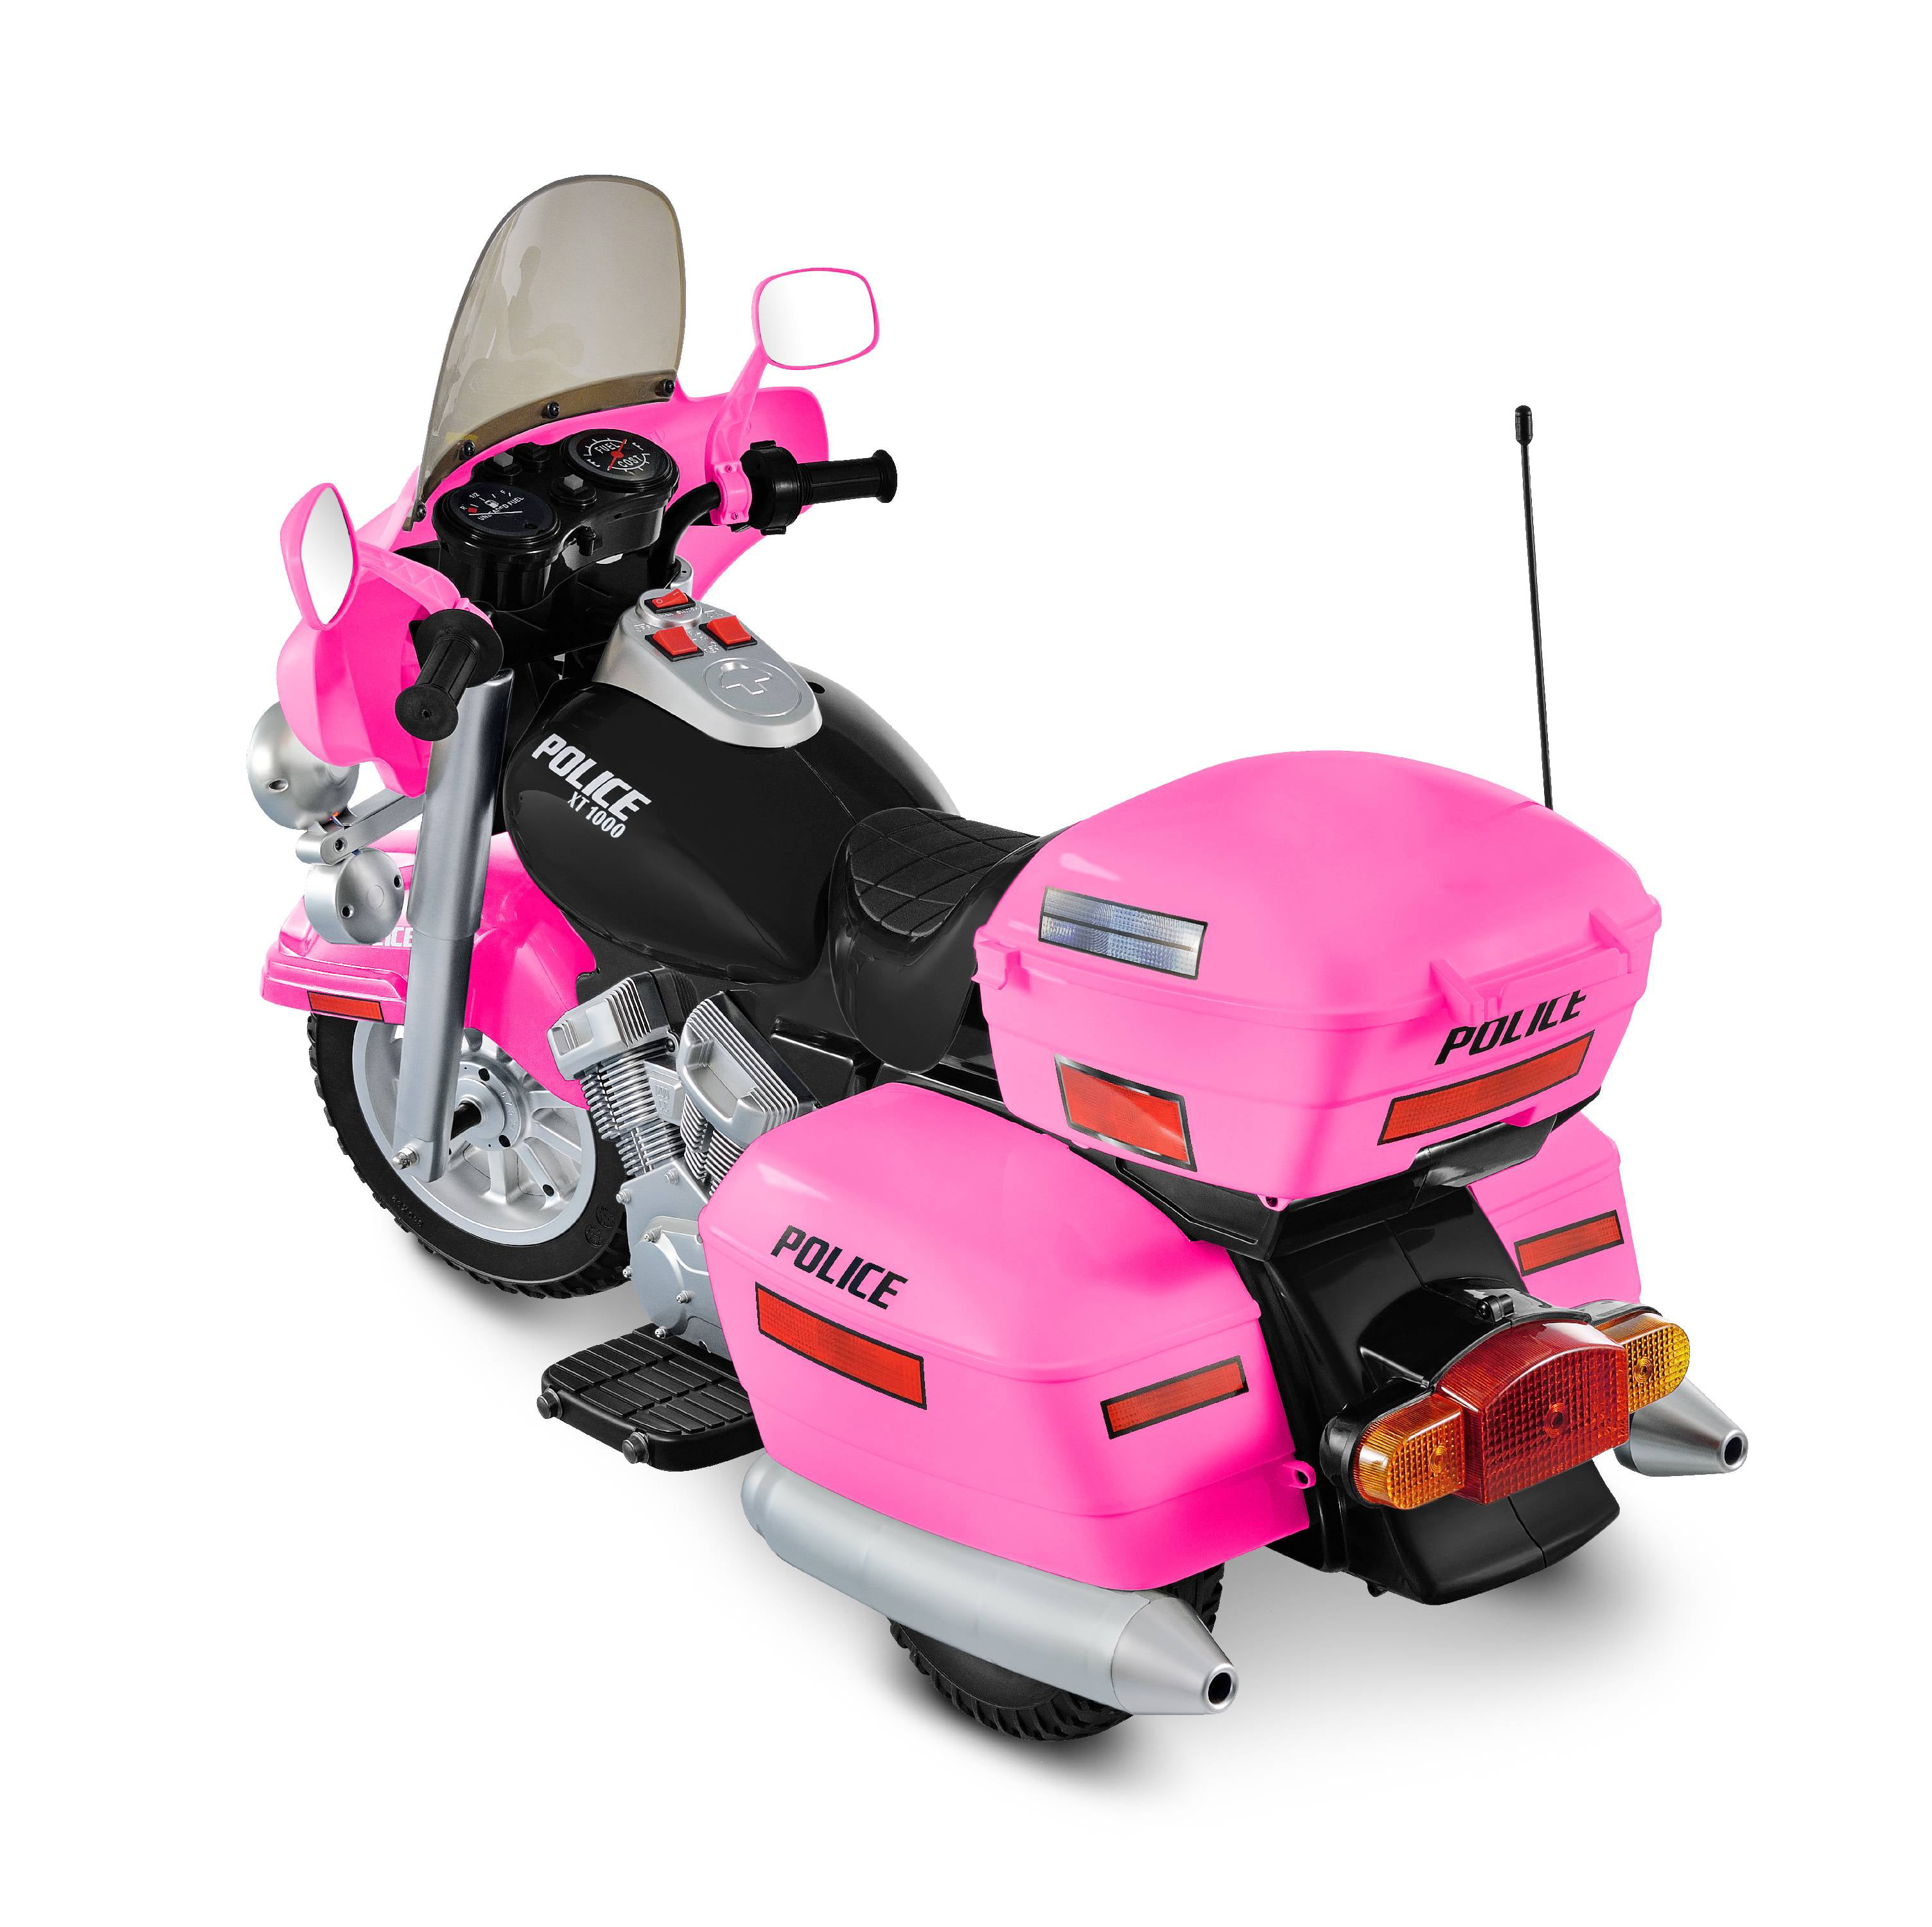 Girls Motorized Motorcycle 12-Volt Battery-Powered Kid's Ride-on Toy